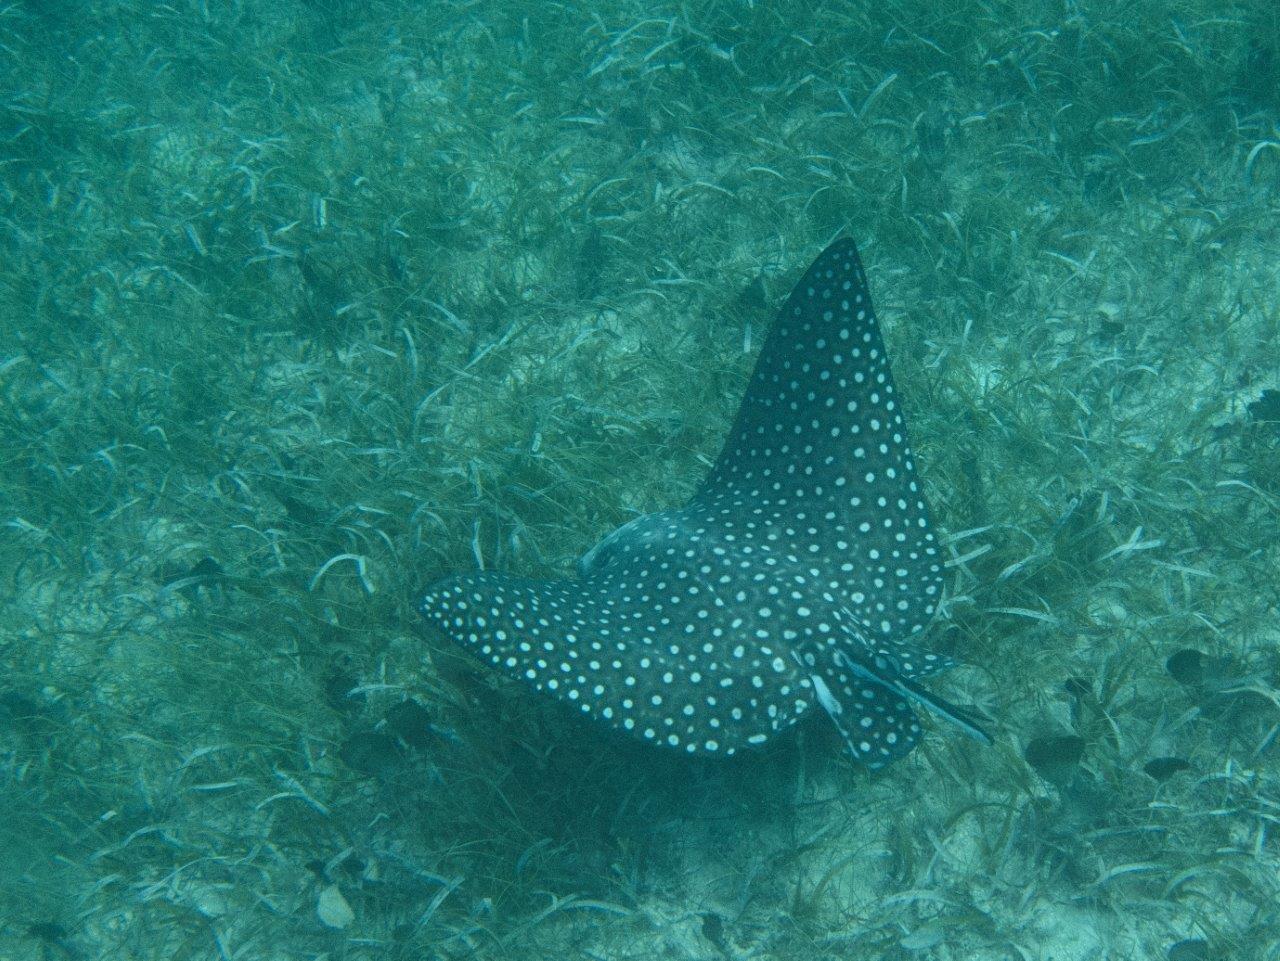 Eagle ray at Creole Rock, Grand Case